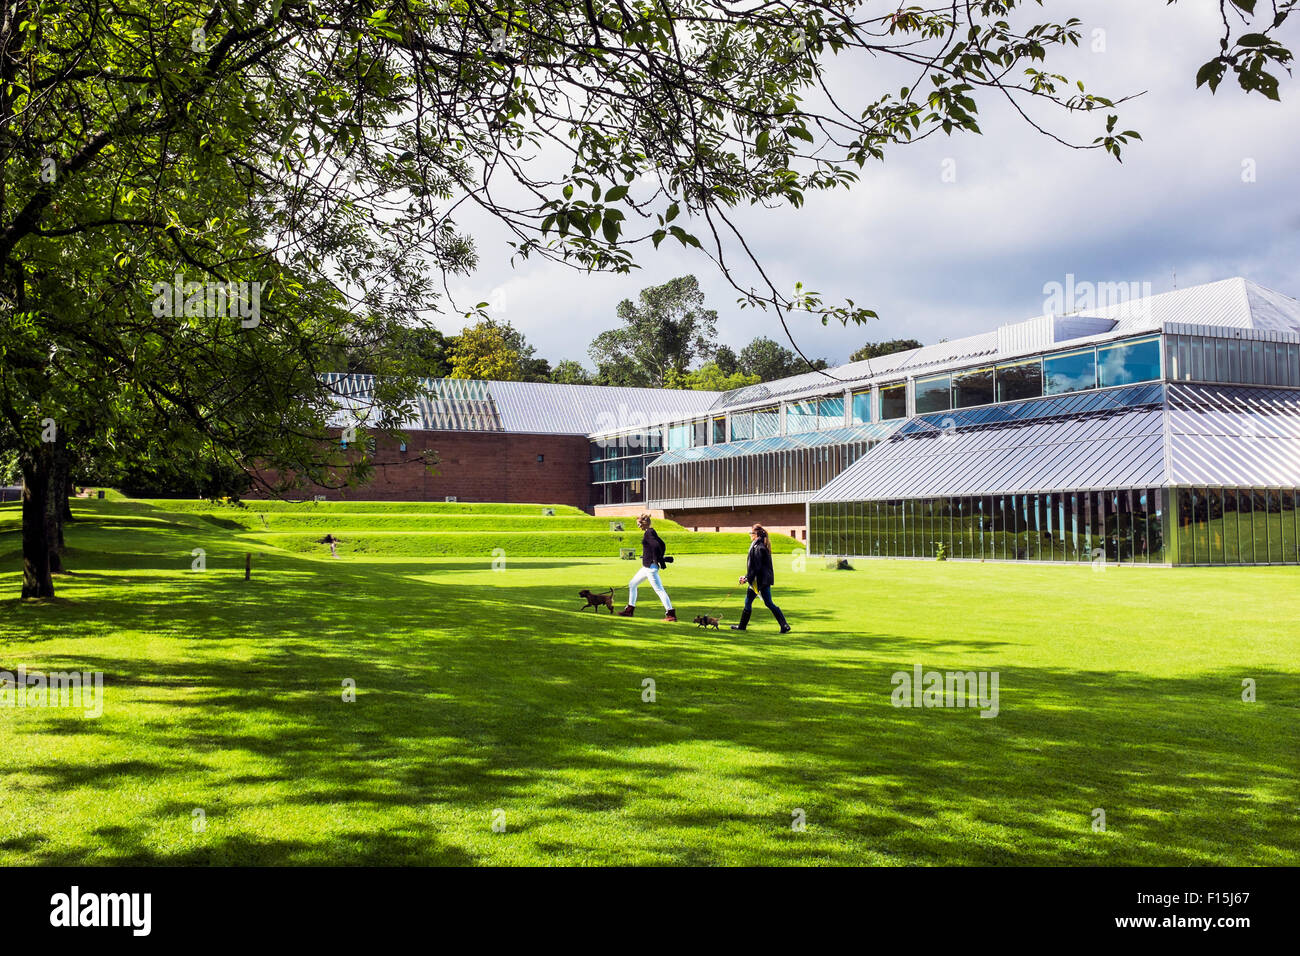 Grounds of the Burrell Collection museum, Pollok Park, Glasgow, Scotland, UK Stock Photo